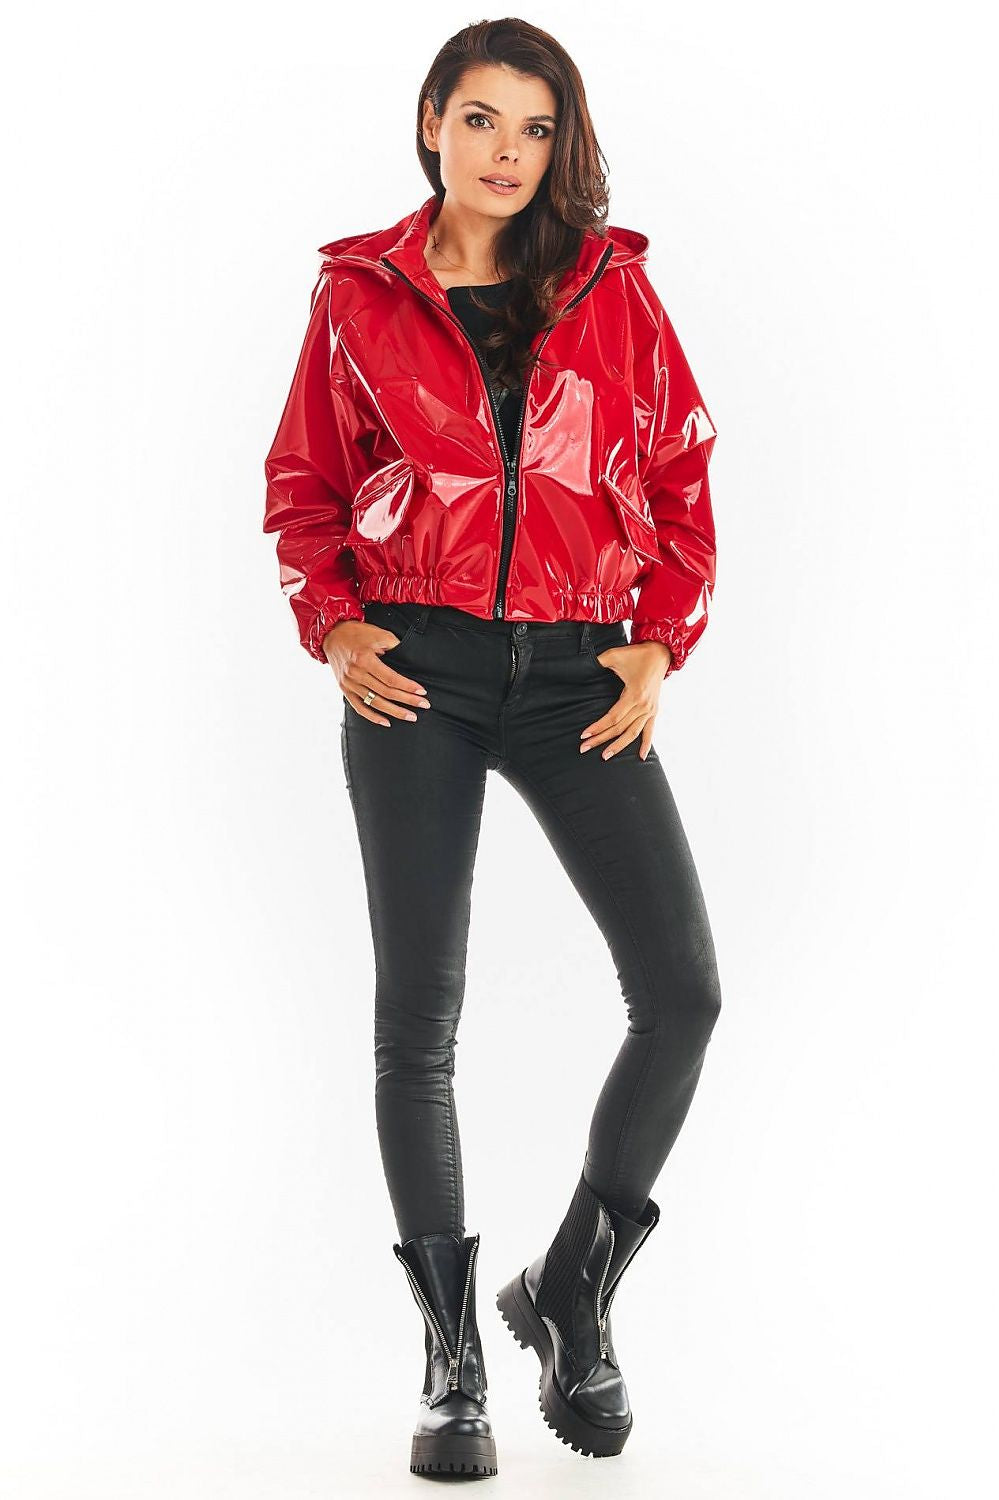 Awama Red Vinyl Short Jacket The Groovalution